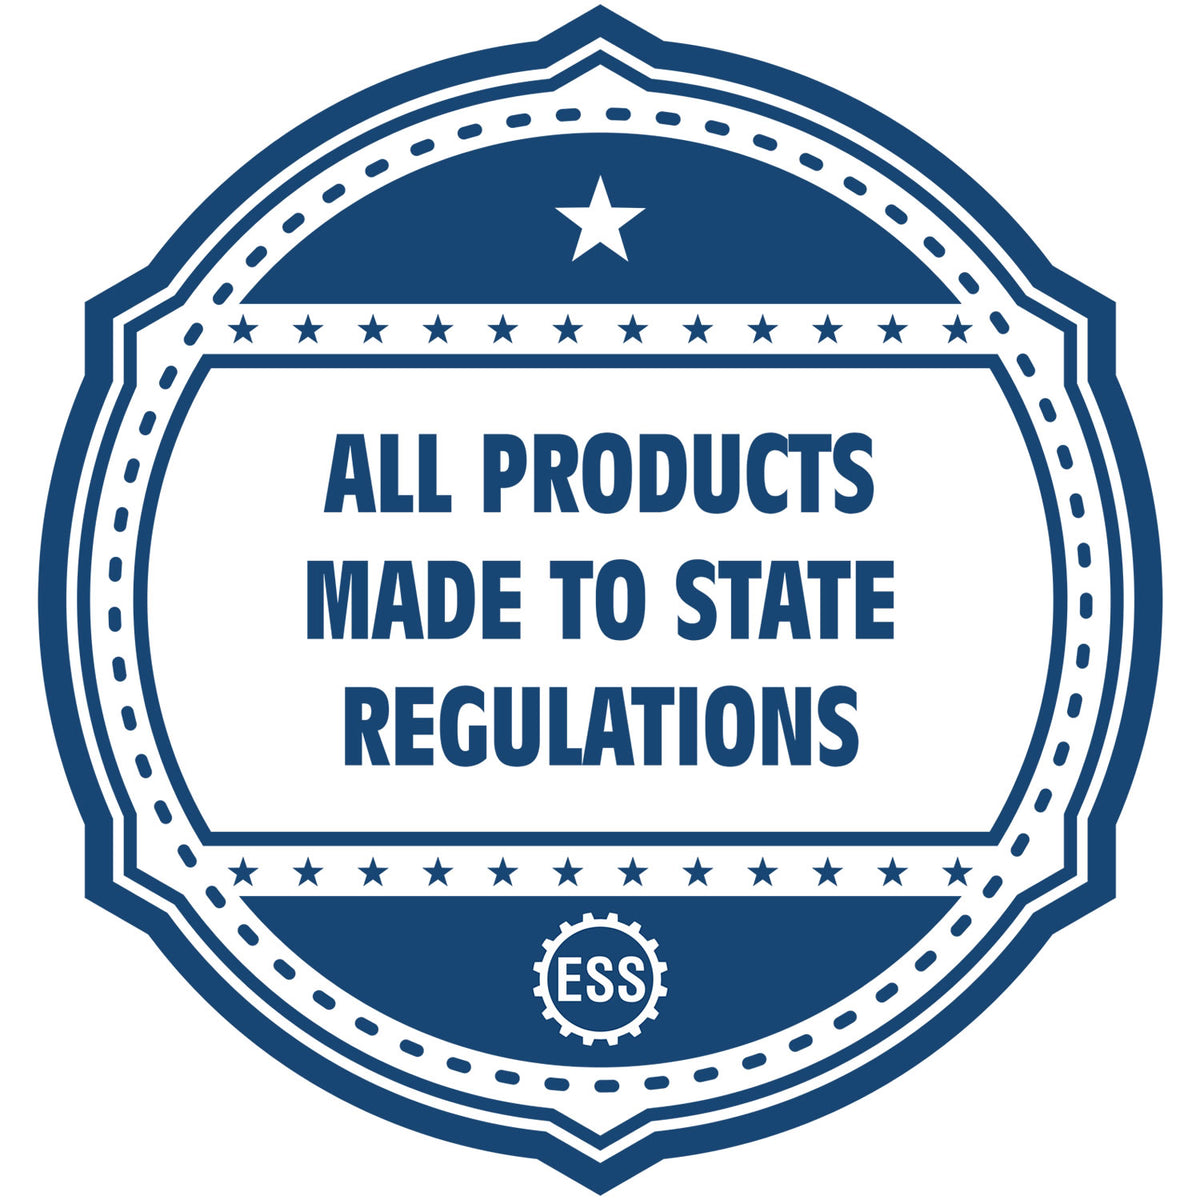 An icon or badge element for the Soft Delaware Professional Engineer Seal showing that this product is made in compliance with state regulations.